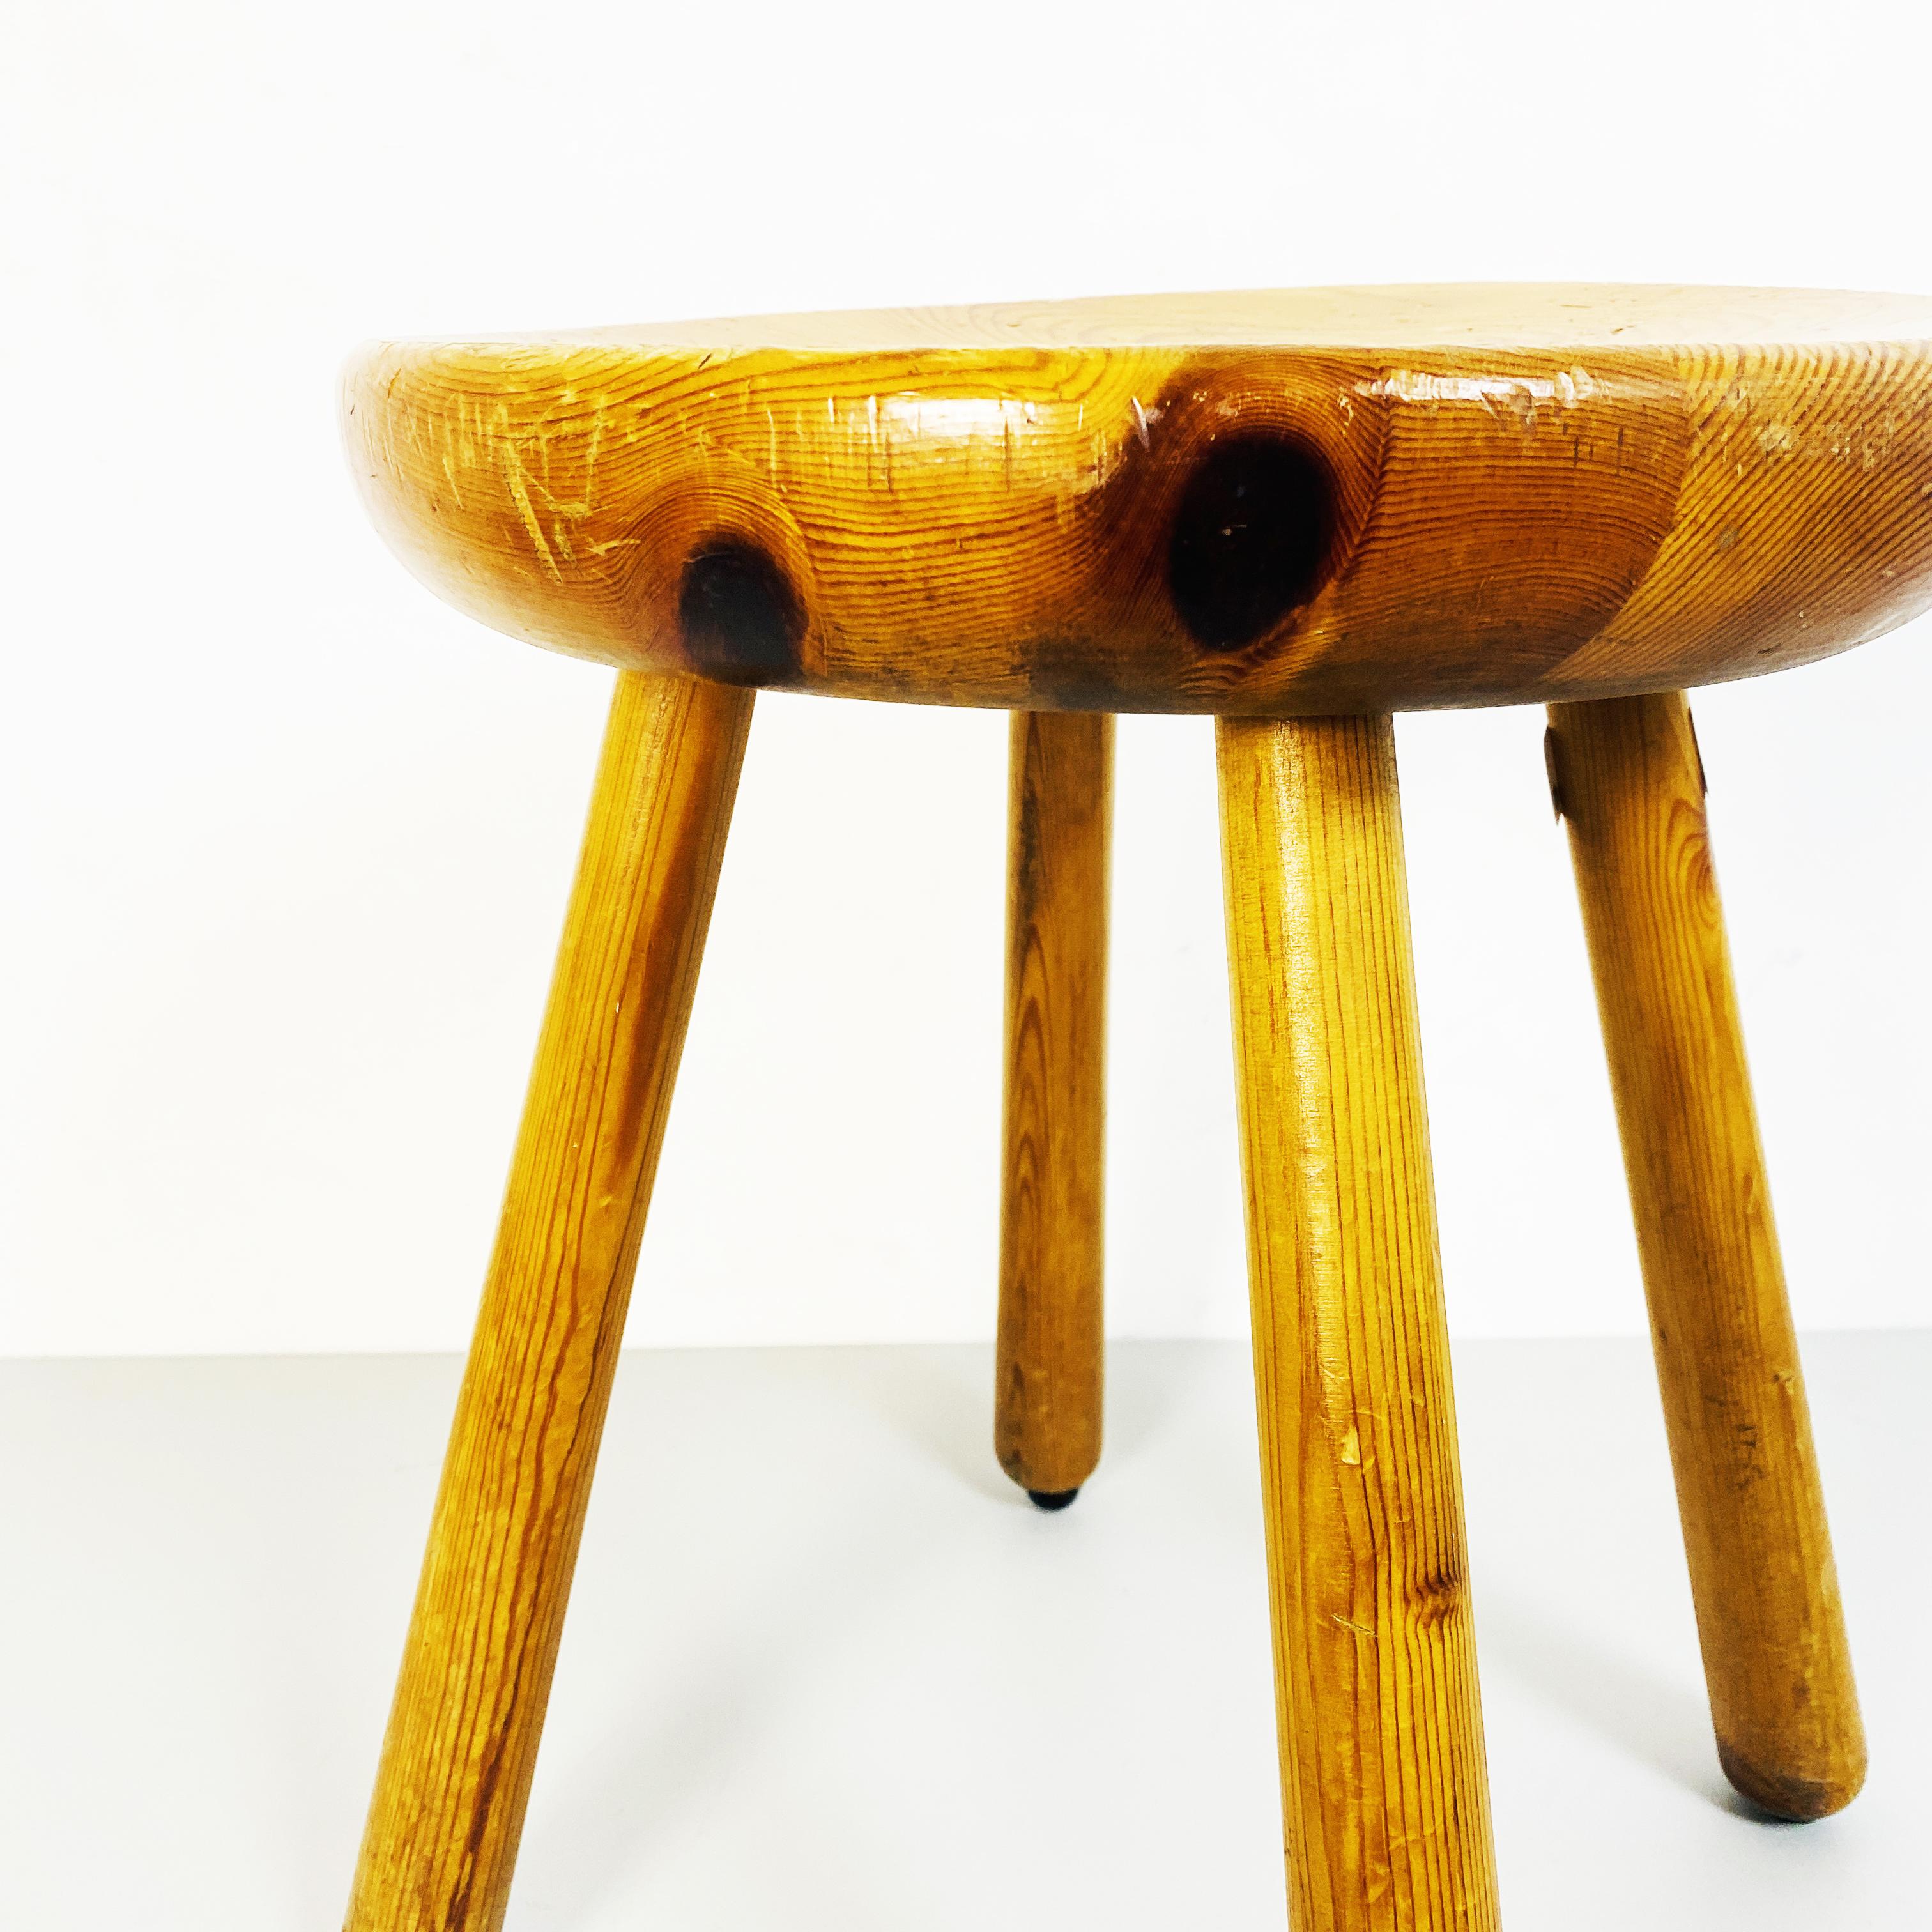 Italian Mid-Century Rustic Wooden Stool, 1960s In Good Condition For Sale In MIlano, IT